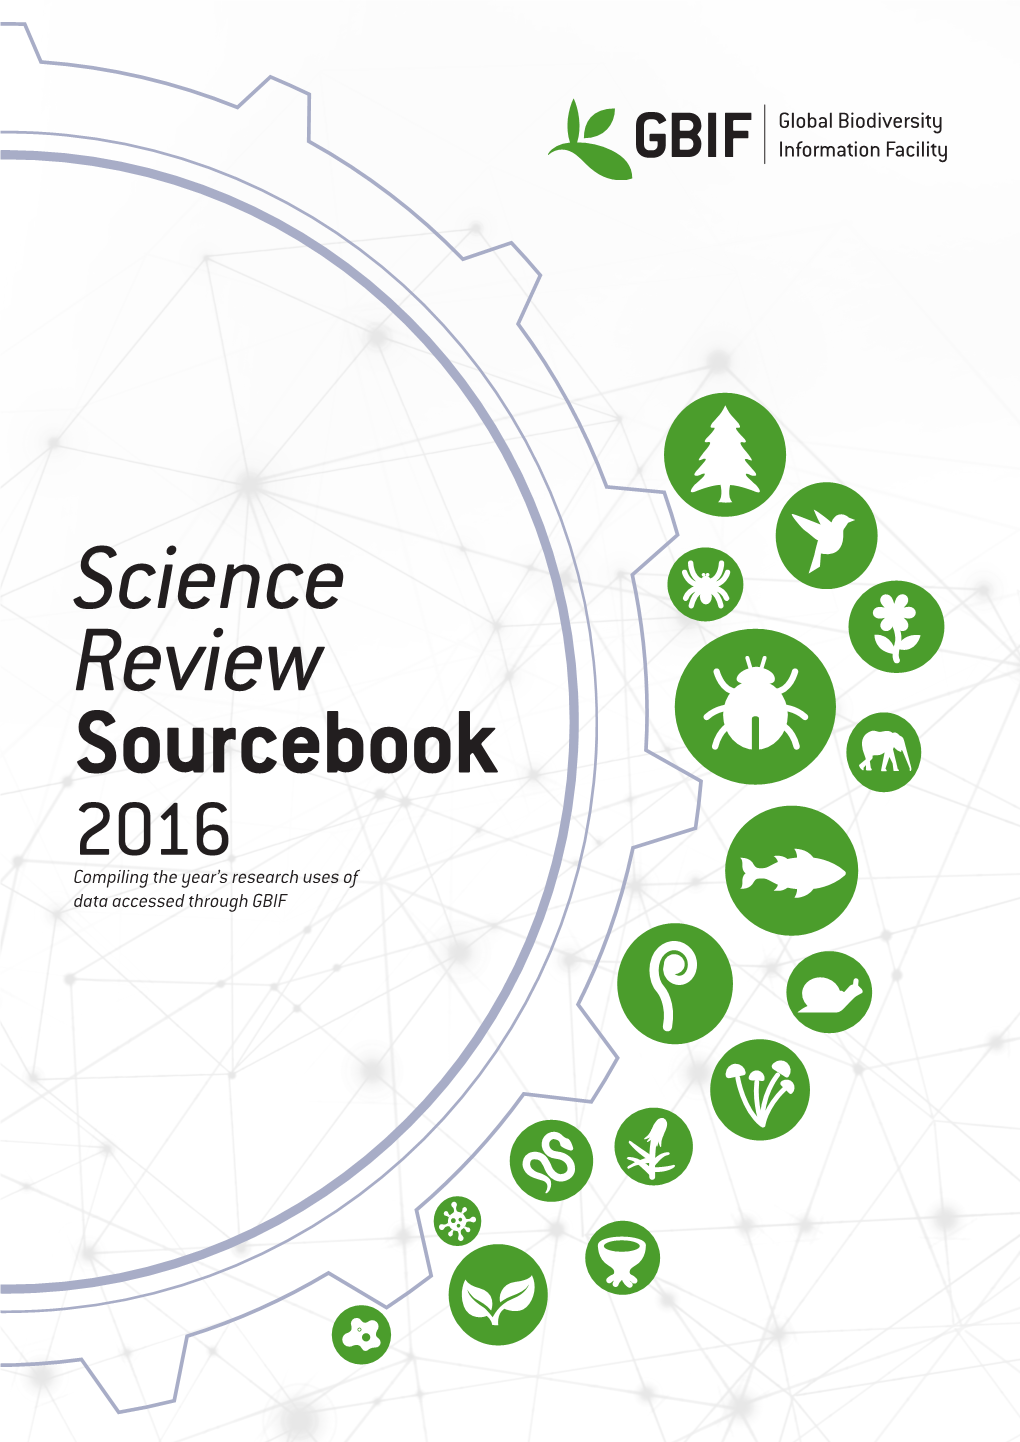 Science Review Sourcebook 2016 Compiling the Year’S Research Uses of Data Accessed Through GBIF 2